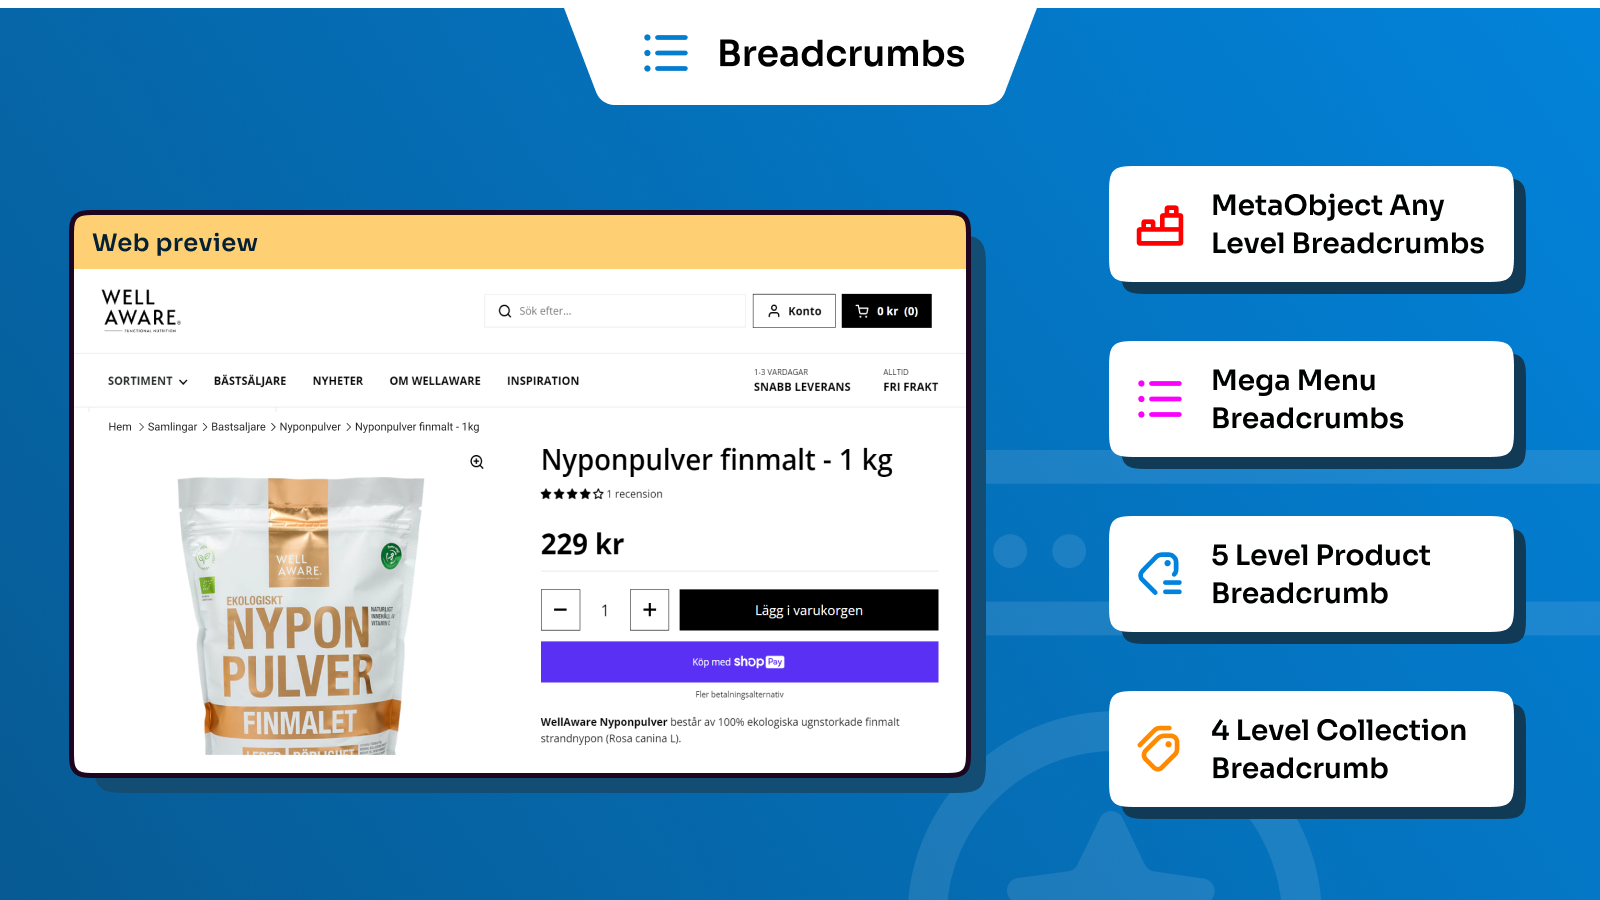 Breadcrumbs Design and Overview 